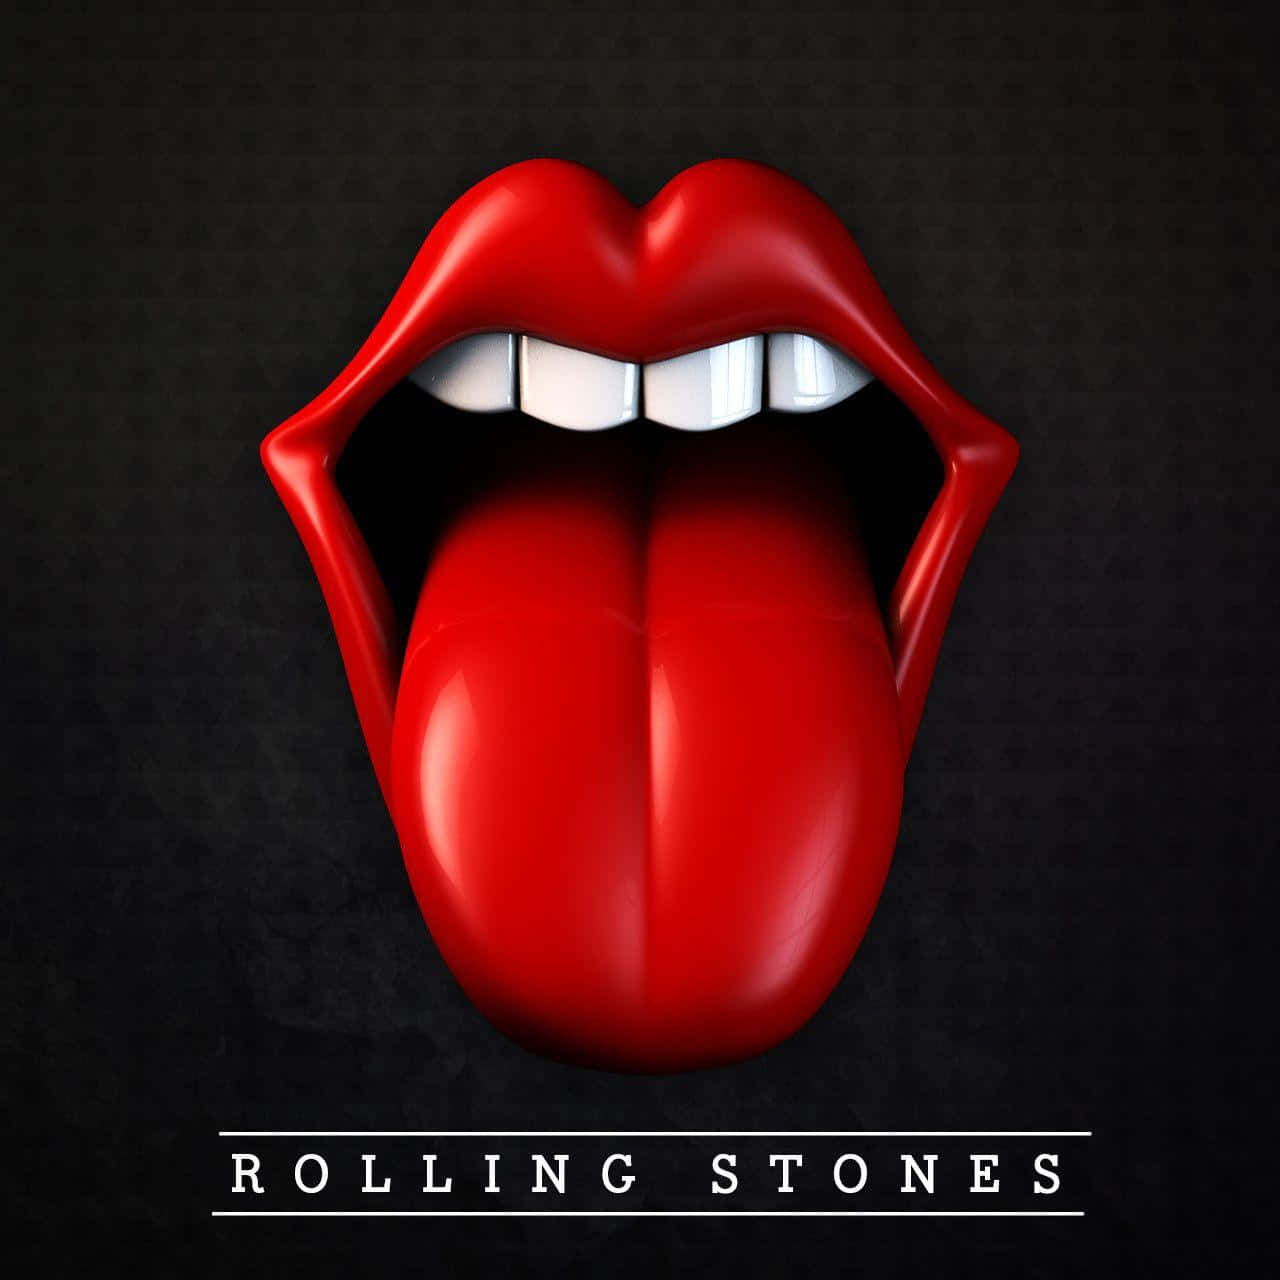 Rolling Stones Logo Tongue Out